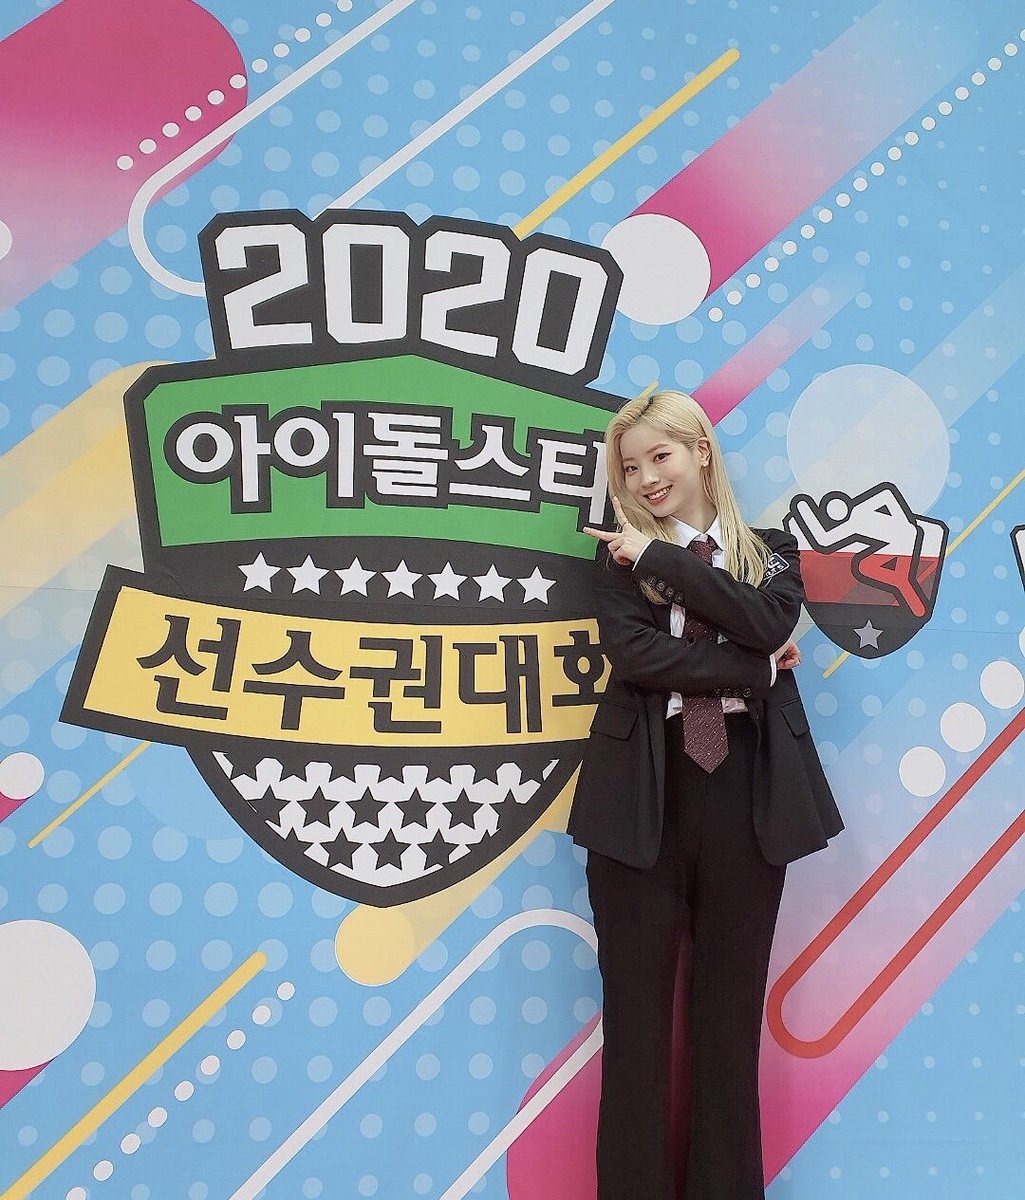 200123hopefully the rest of 2020 is gonna be great but idk how that'll happen if dahyun is still nowhere to be found akdkasjk 